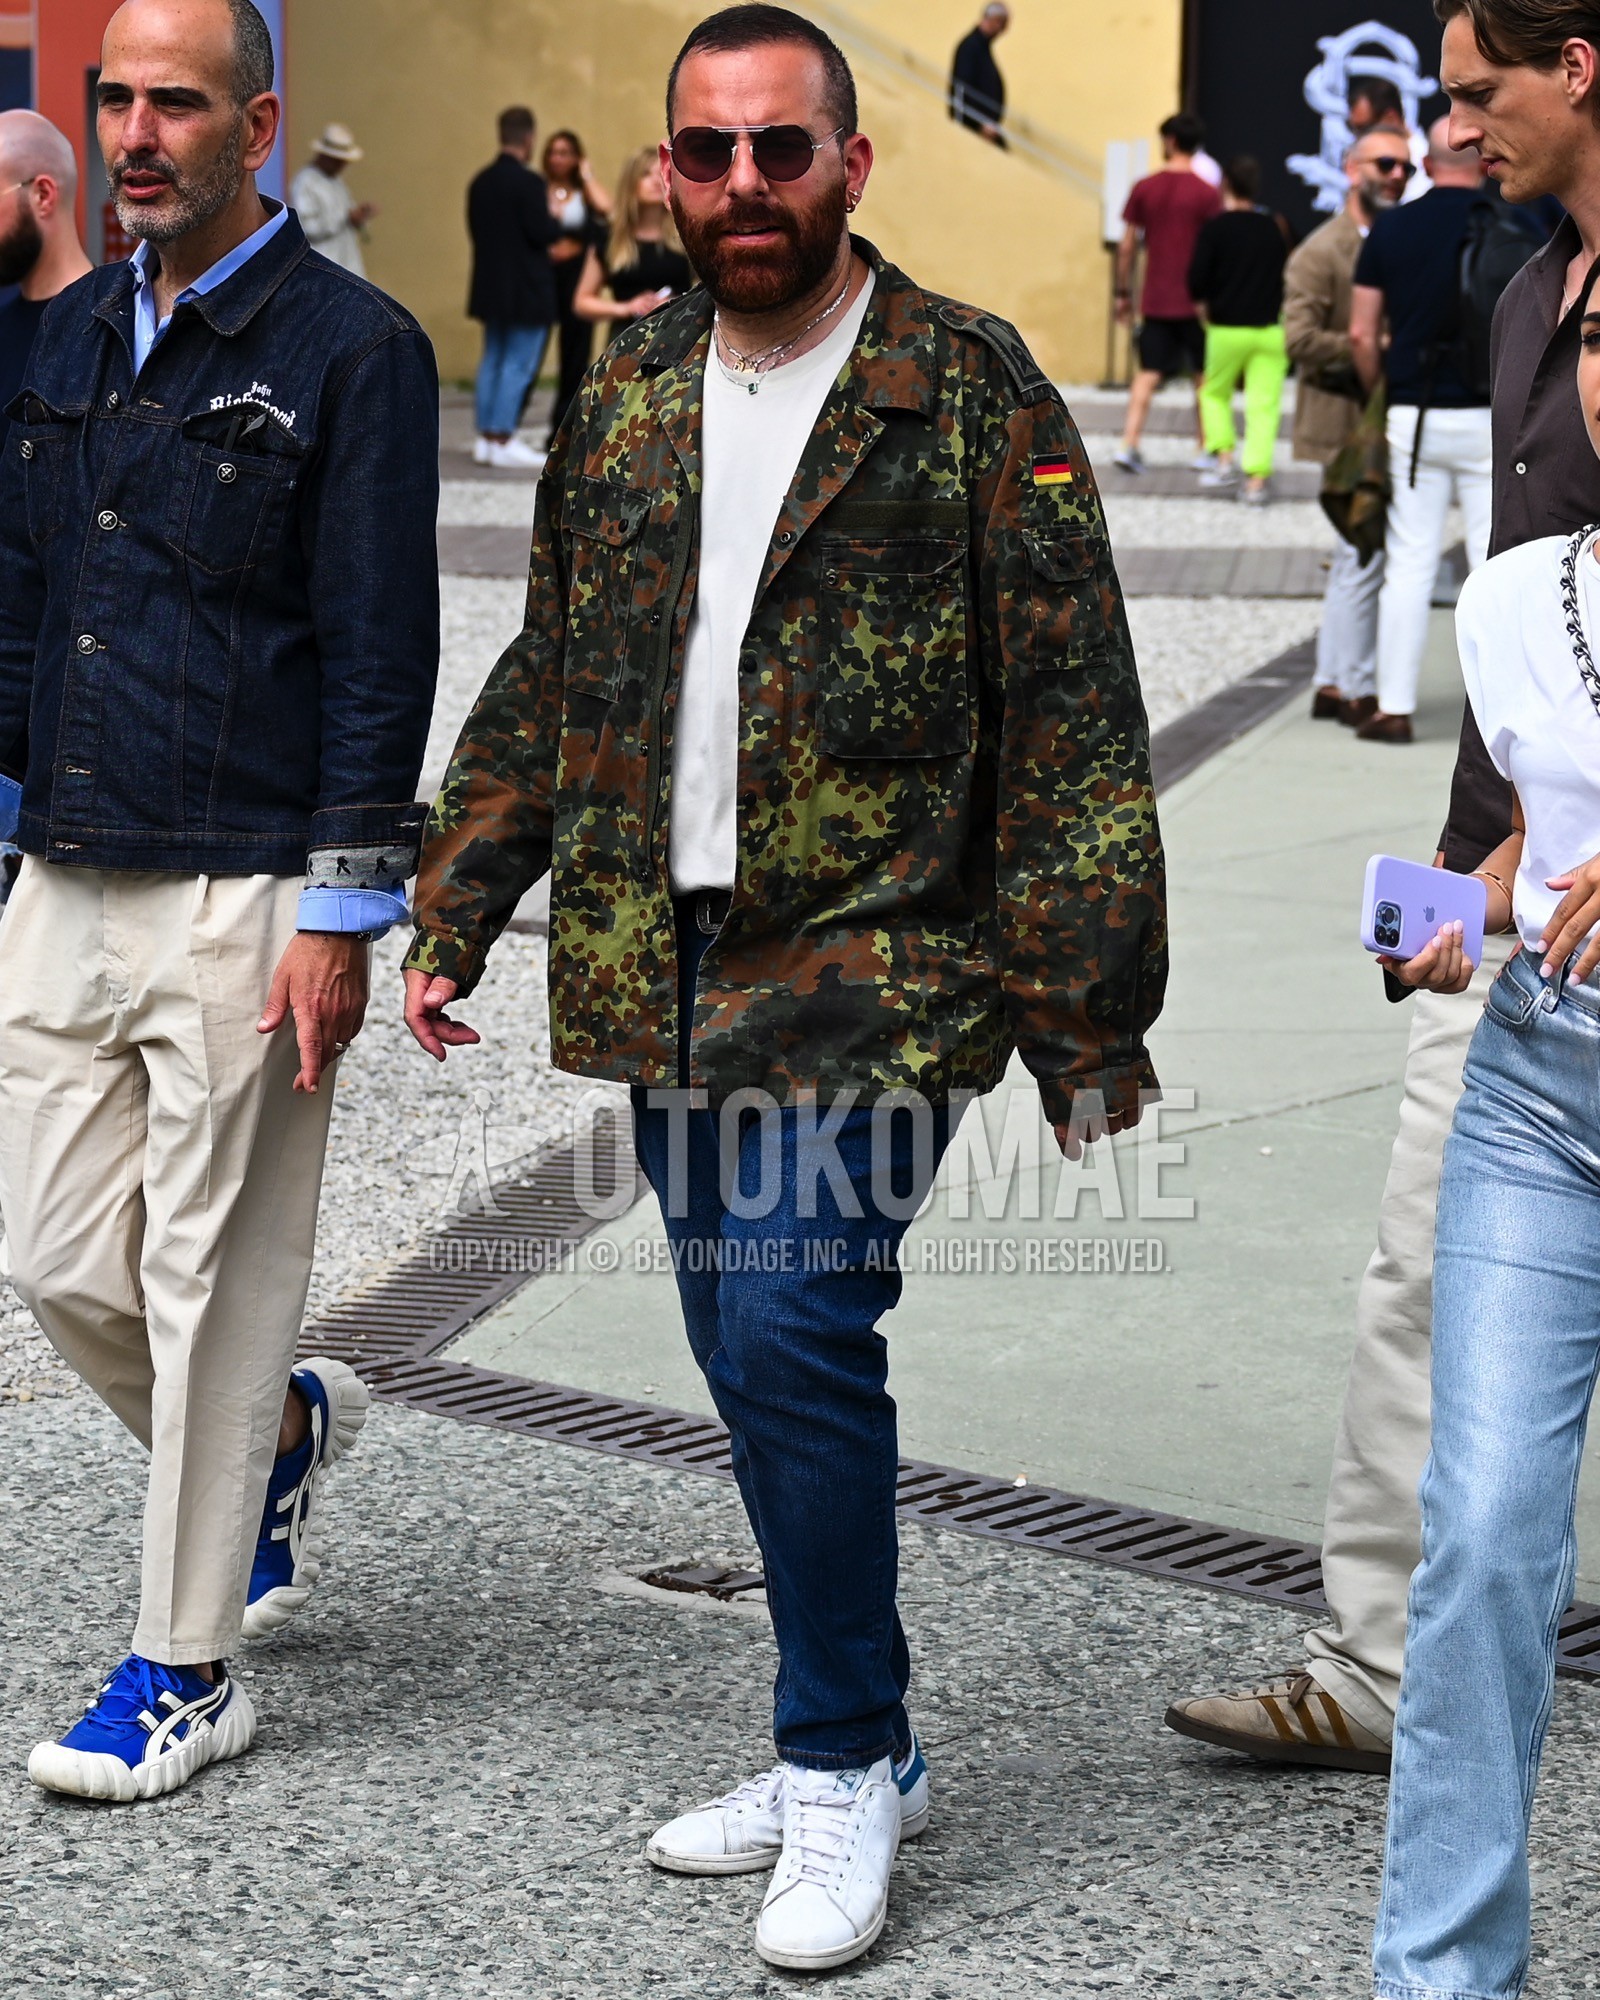 Men's spring summer autumn outfit with black plain sunglasses, olive green camouflage military jacket, white plain t-shirt, brown plain denim/jeans, white low-cut sneakers.